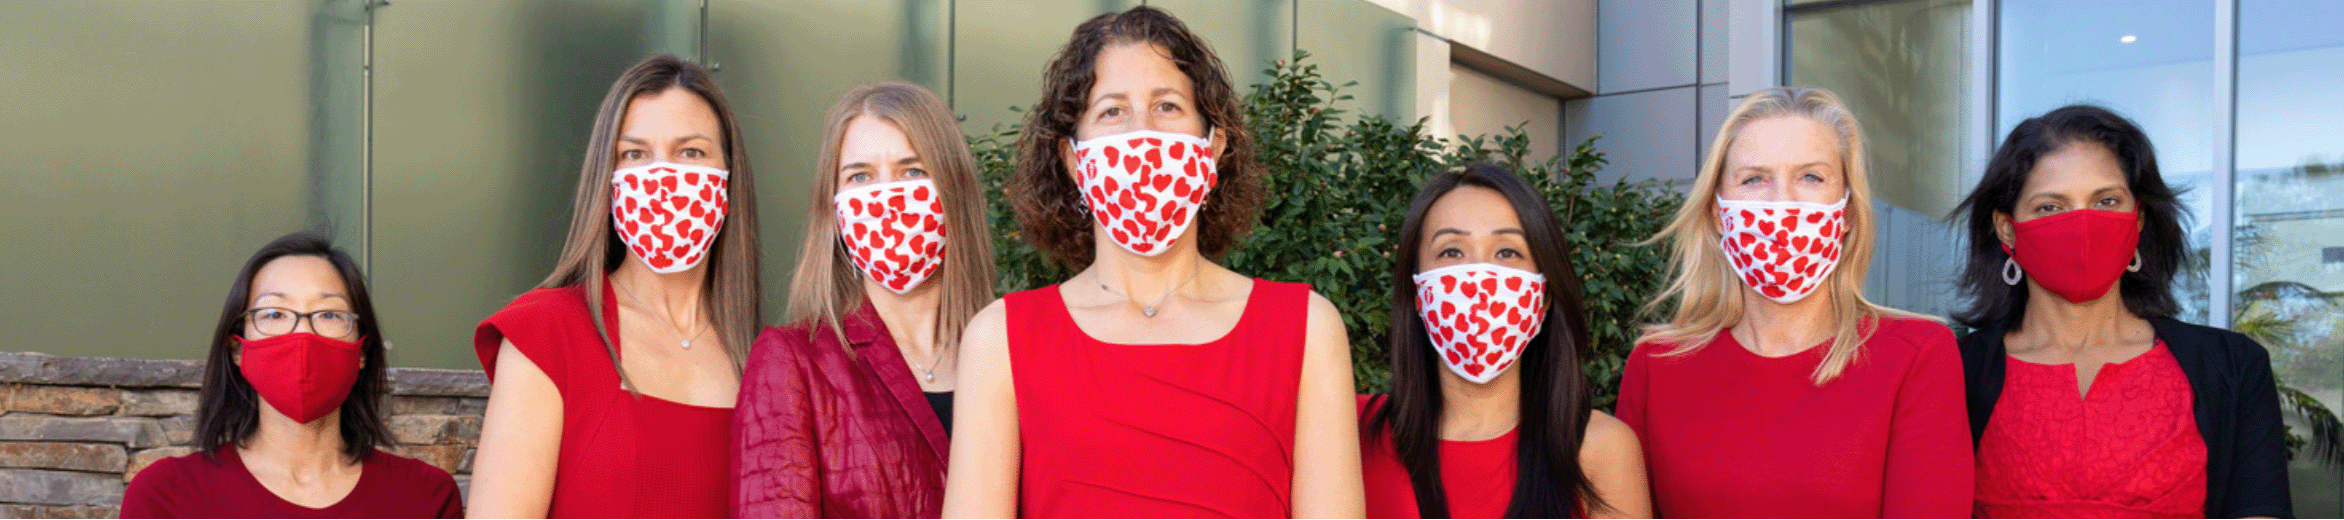 Women Cardiologists at UC San Diego wear red